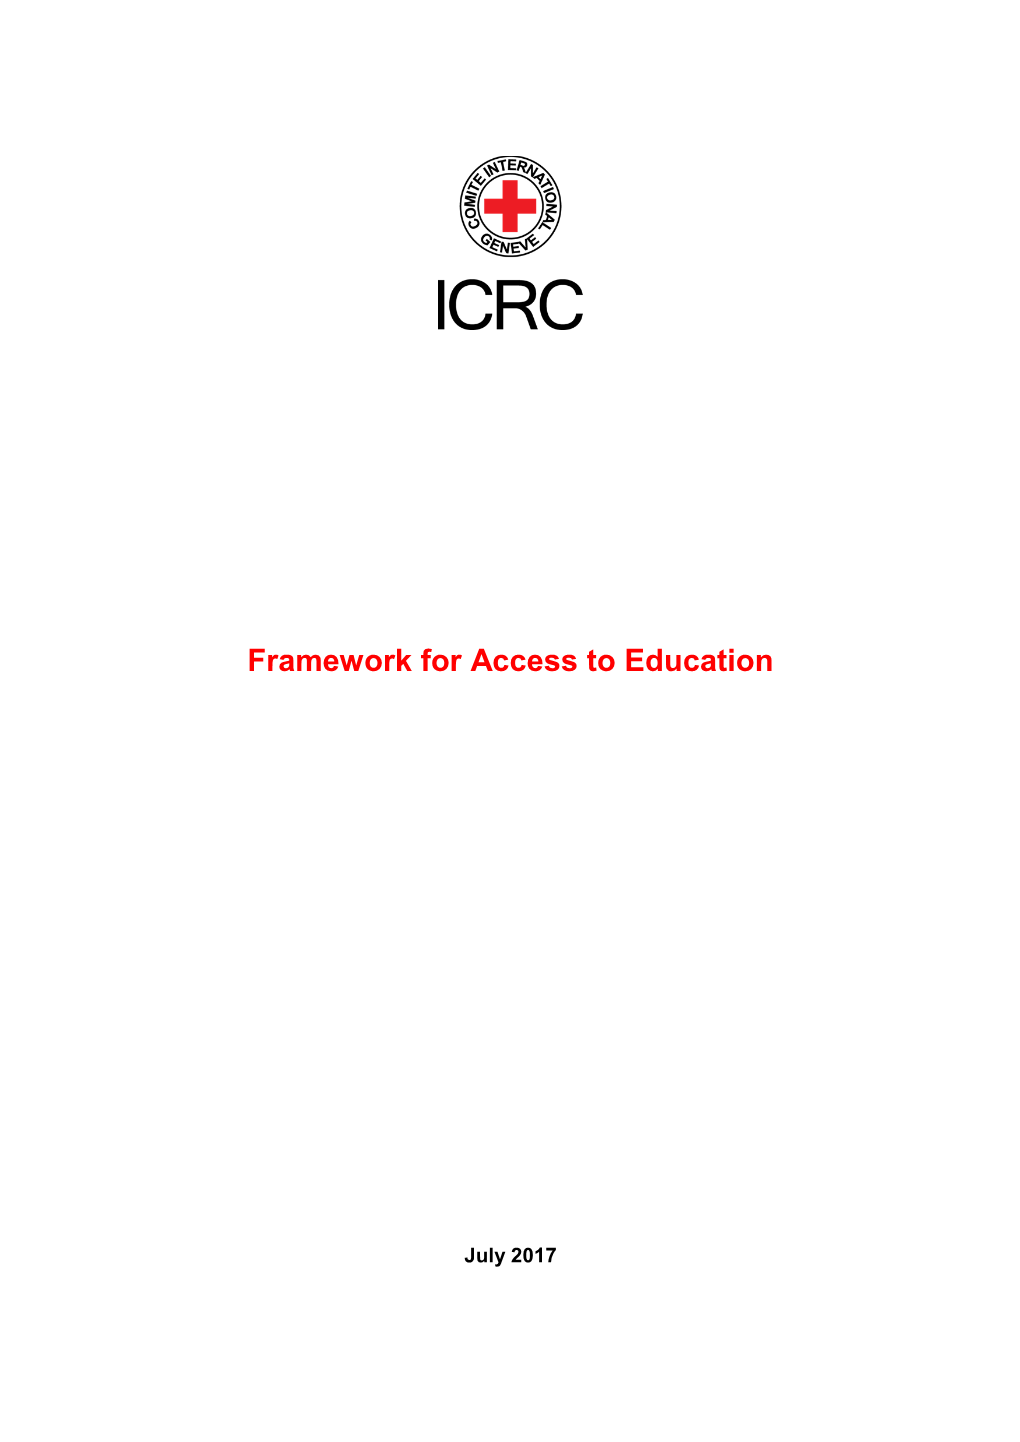 ICRC Framework for Access to Education